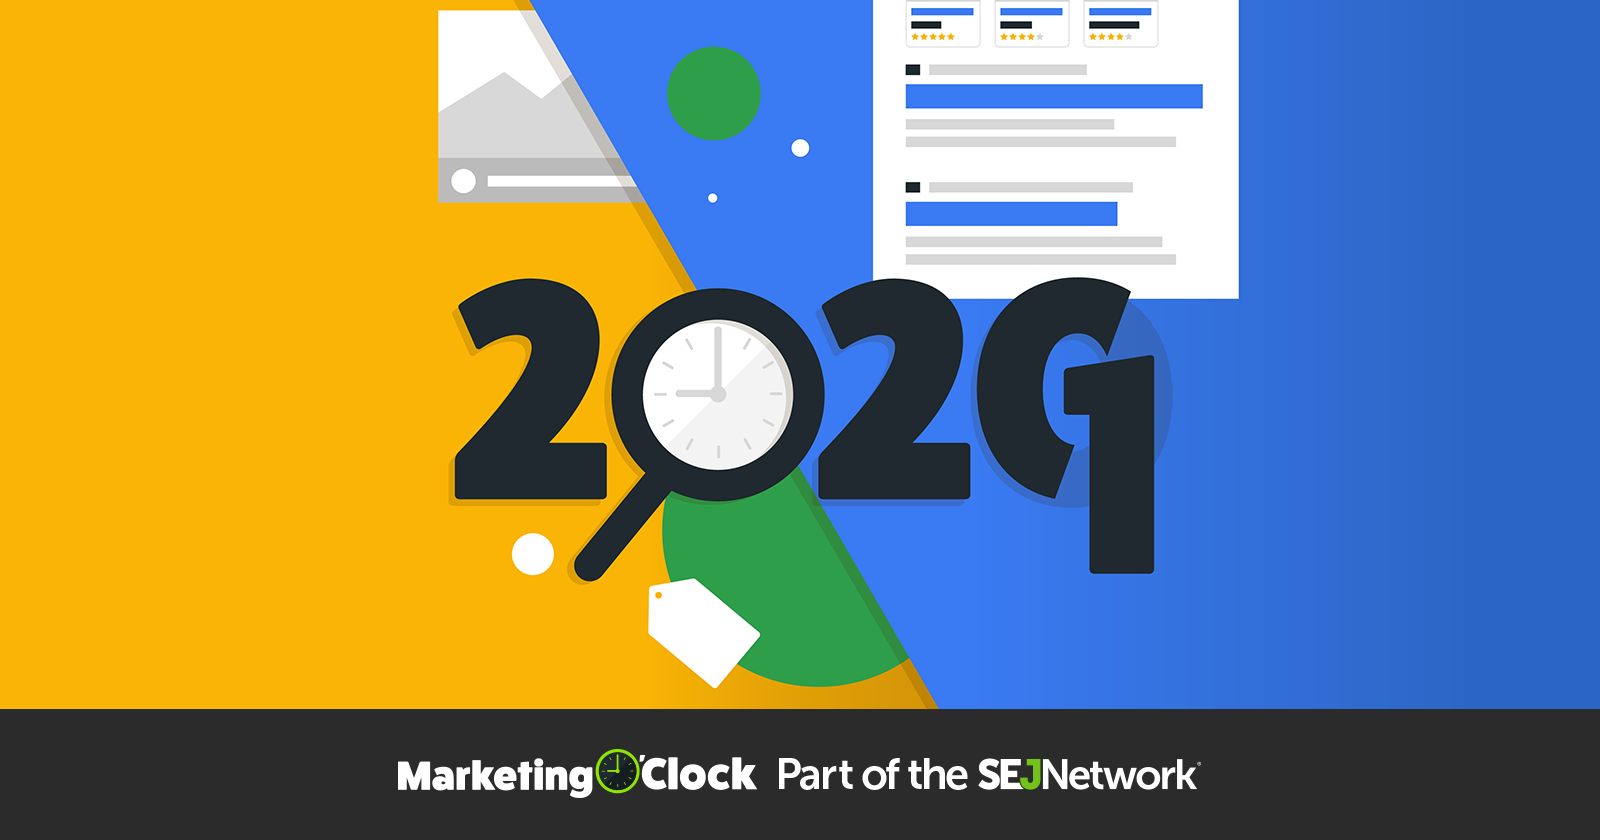 Announcements from Google I/O & More Digital Marketing News [PODCAST]